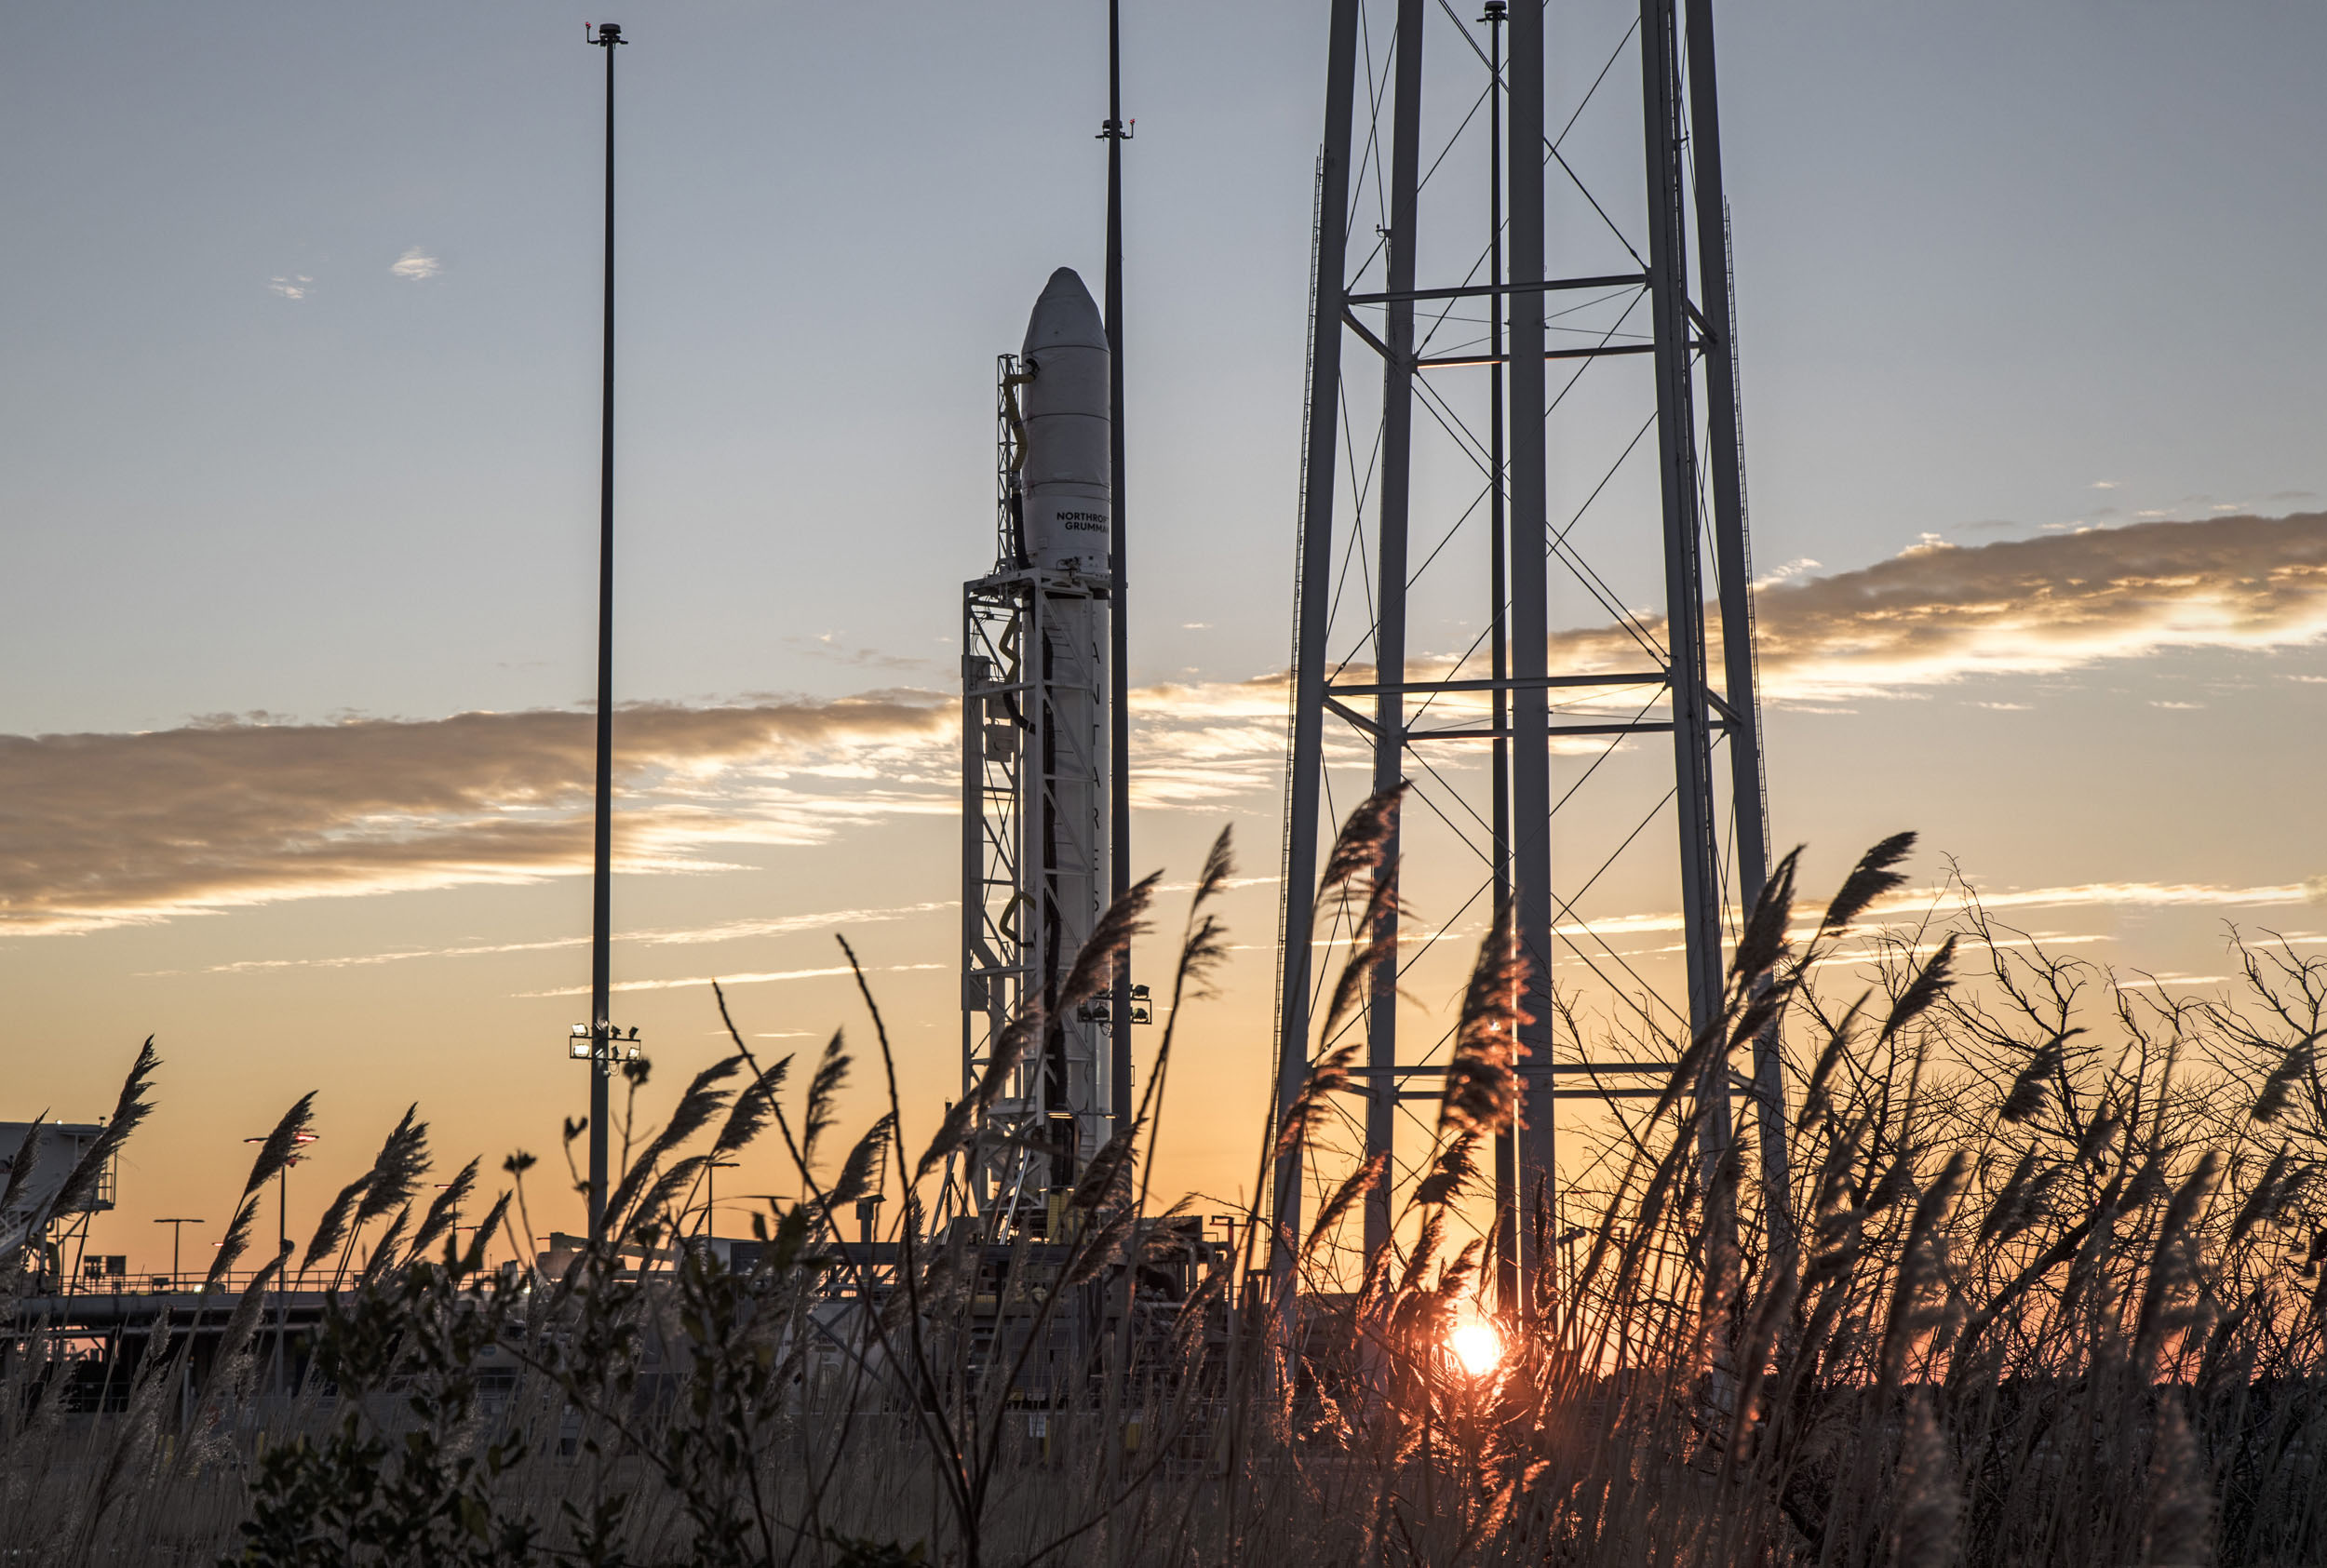 A rocket on launch pad in front of a morning sunrise